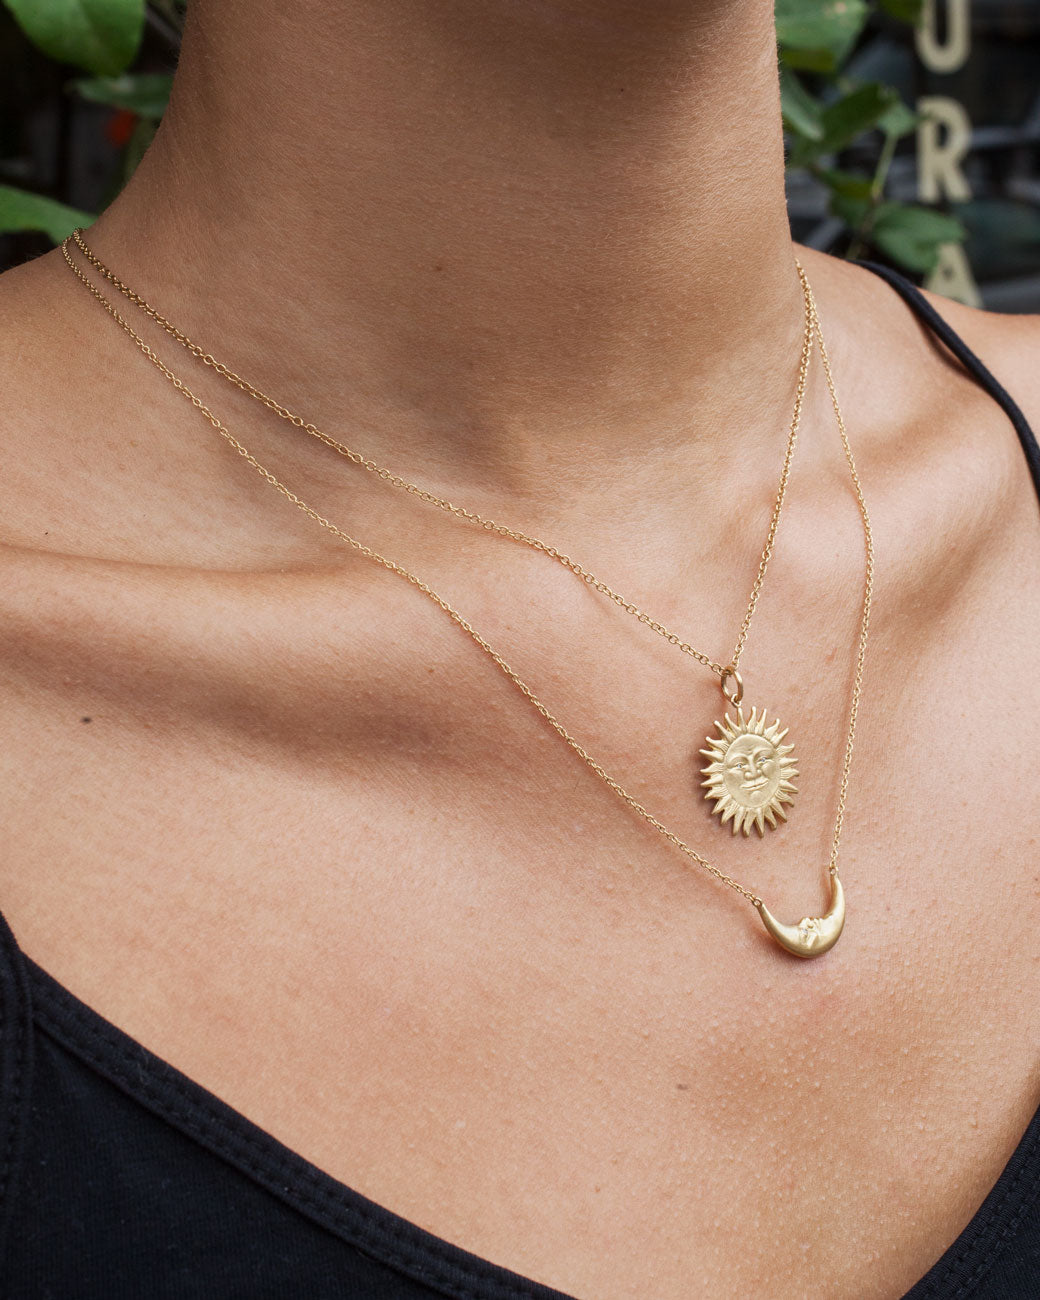 Womans chest wearing two necklaces. The bottom necklace is a tiny yellow gold crescent moon, with a face carved into it and little diamond eyes, is a unique pendant. Double sided and hanging from a chain. The chain is attached to the ends of the crescent, so it falls on a sideways/horizontal angle across the chest.